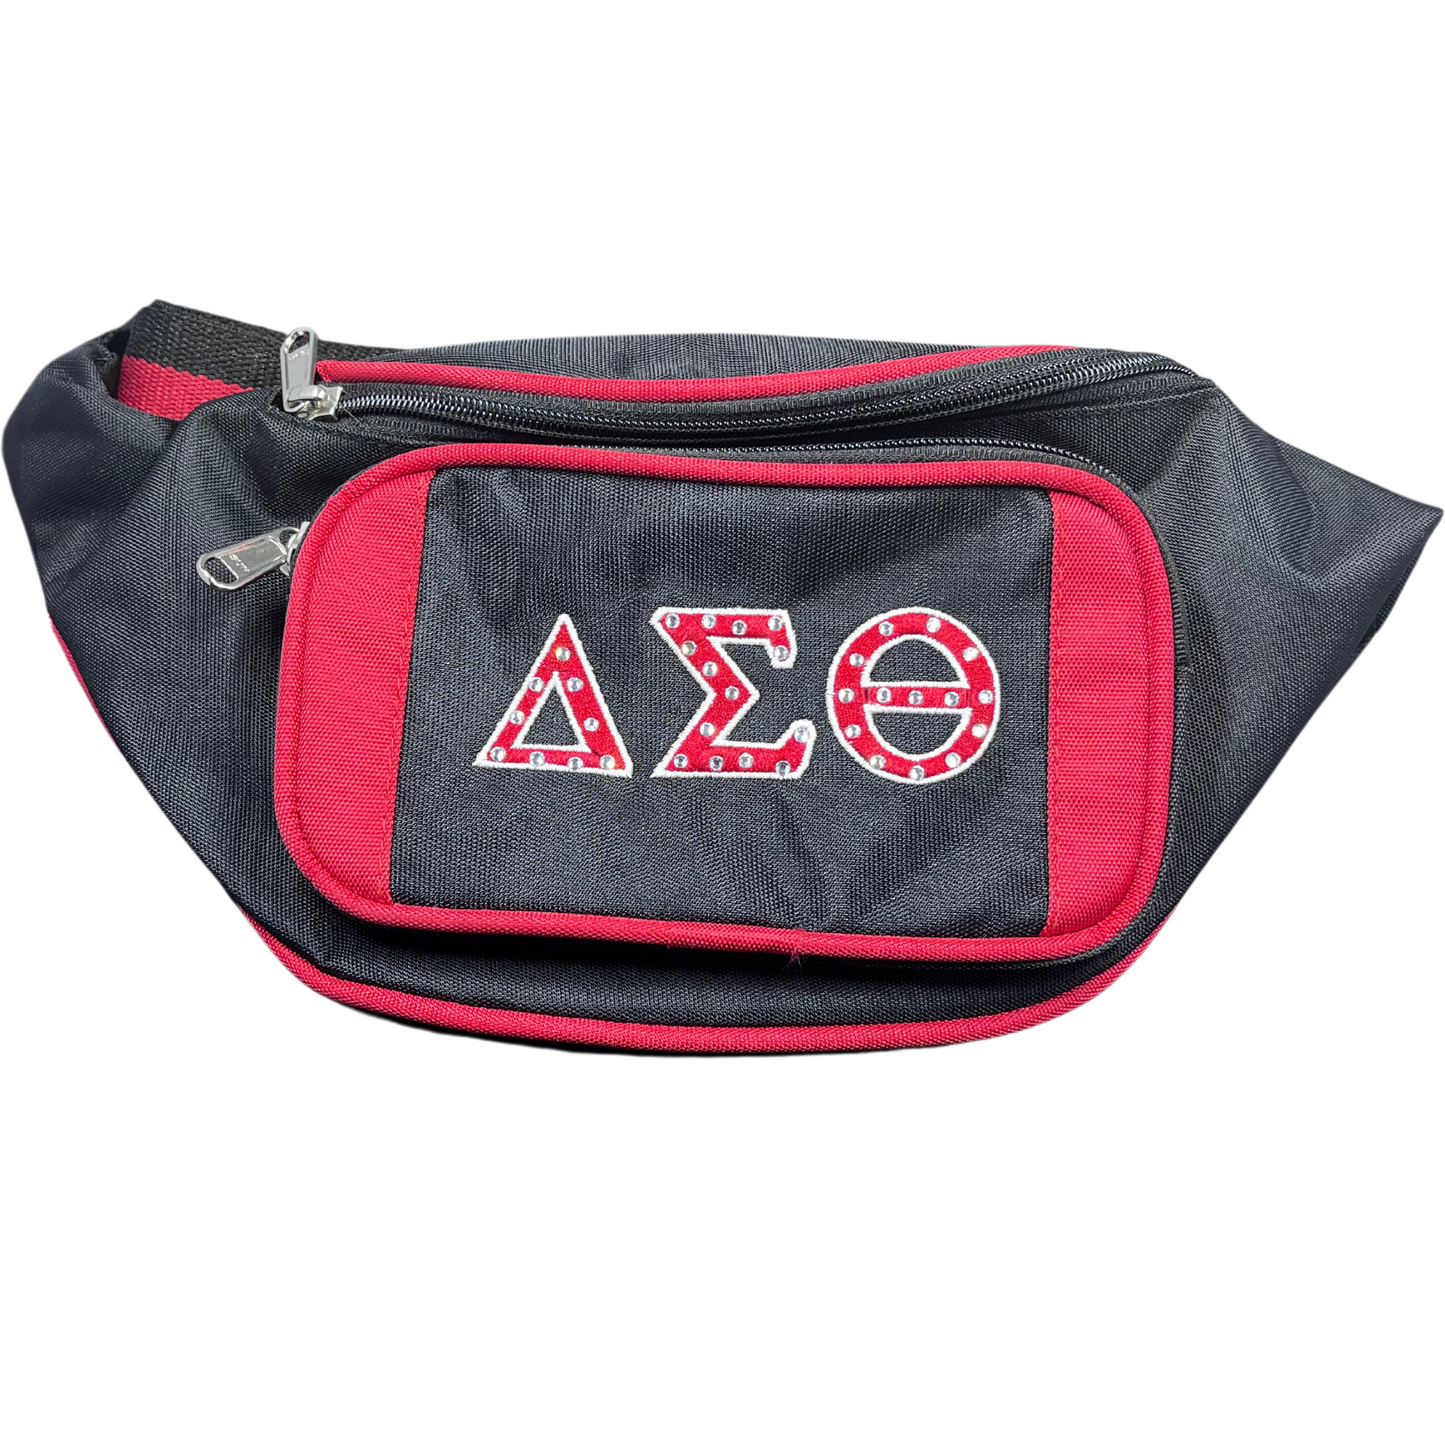 DST Fanny Pack avail with or without bling